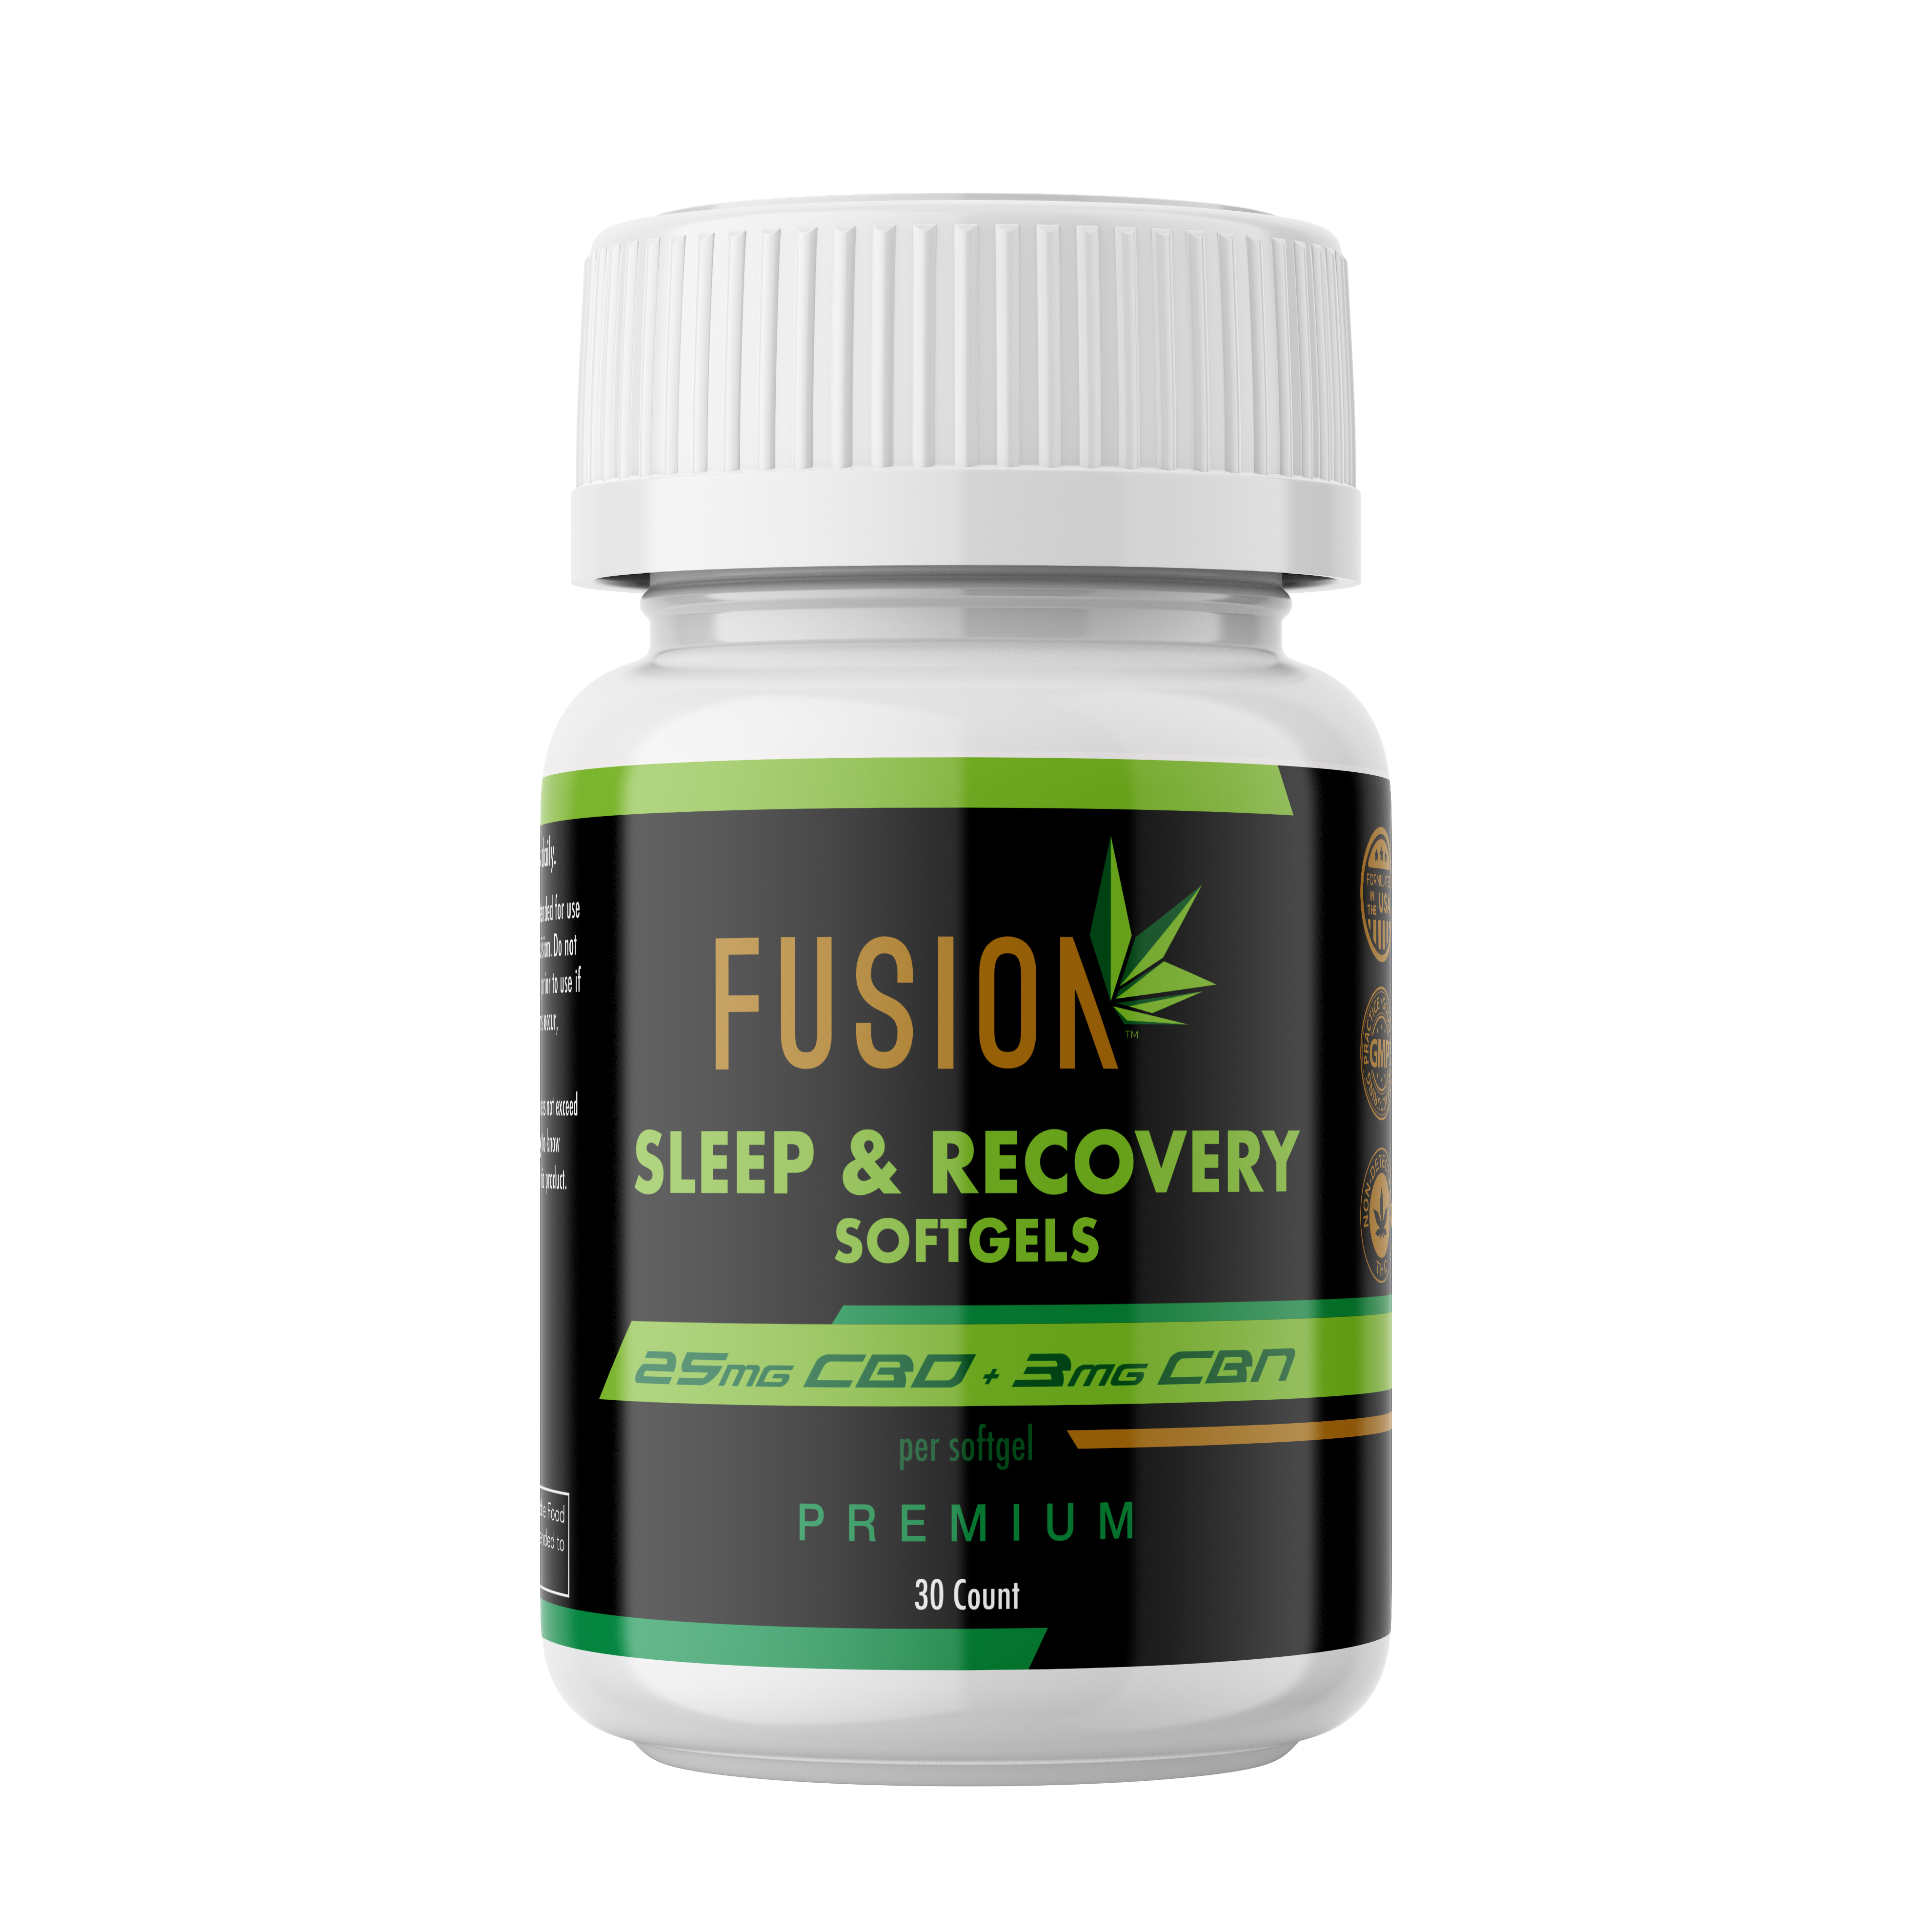 fusion-sleep-recovery-softgels-wholesale-6-pack